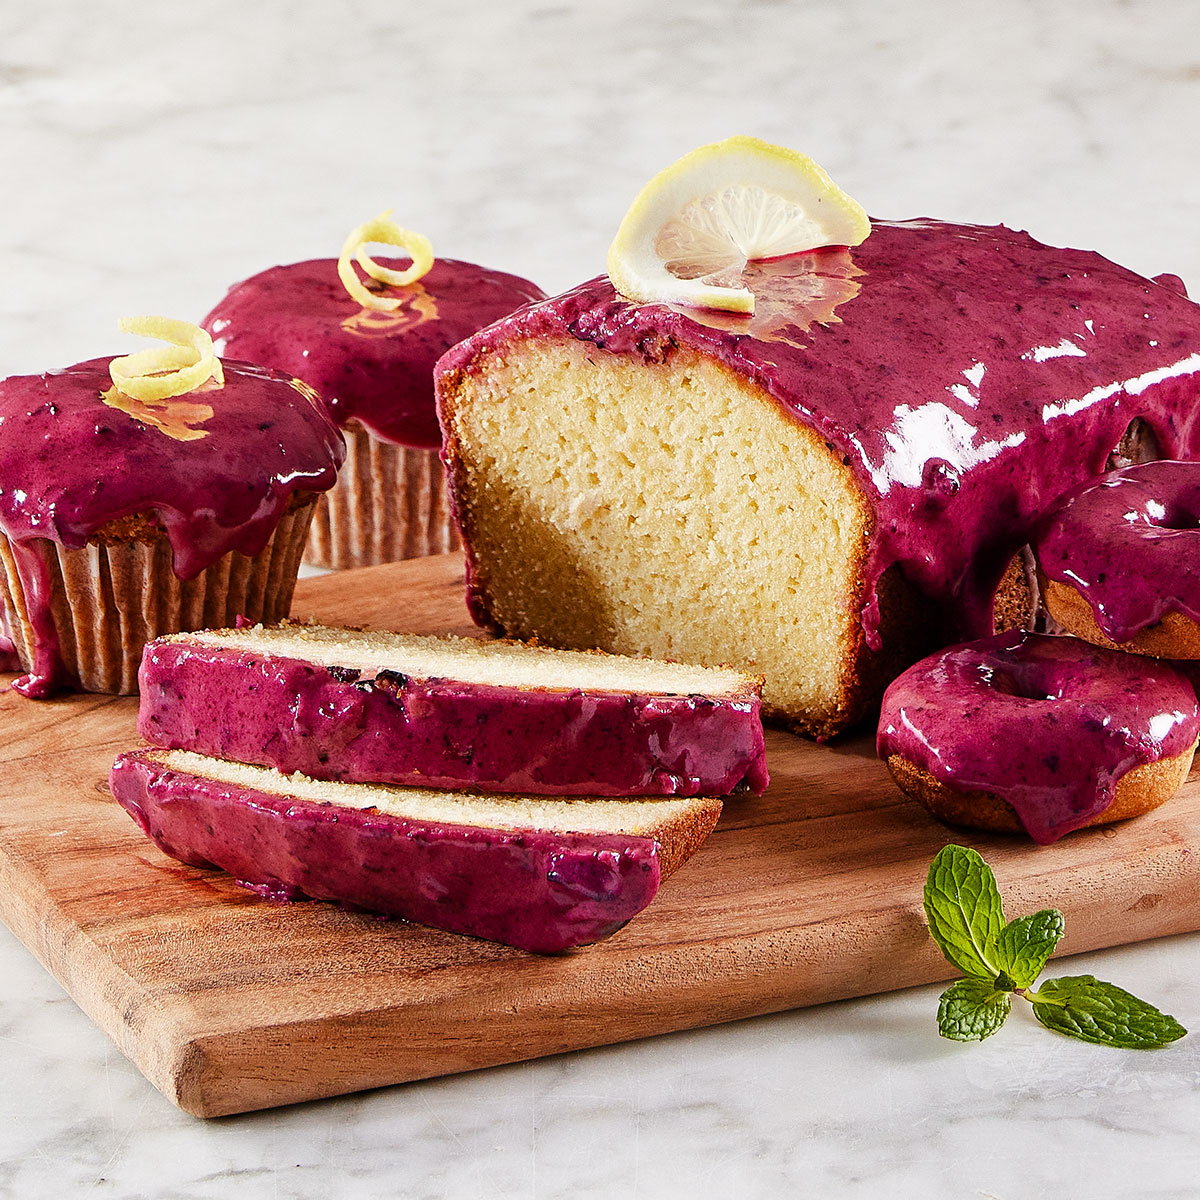 image of multiple baked goods covered in a blueberry glaze